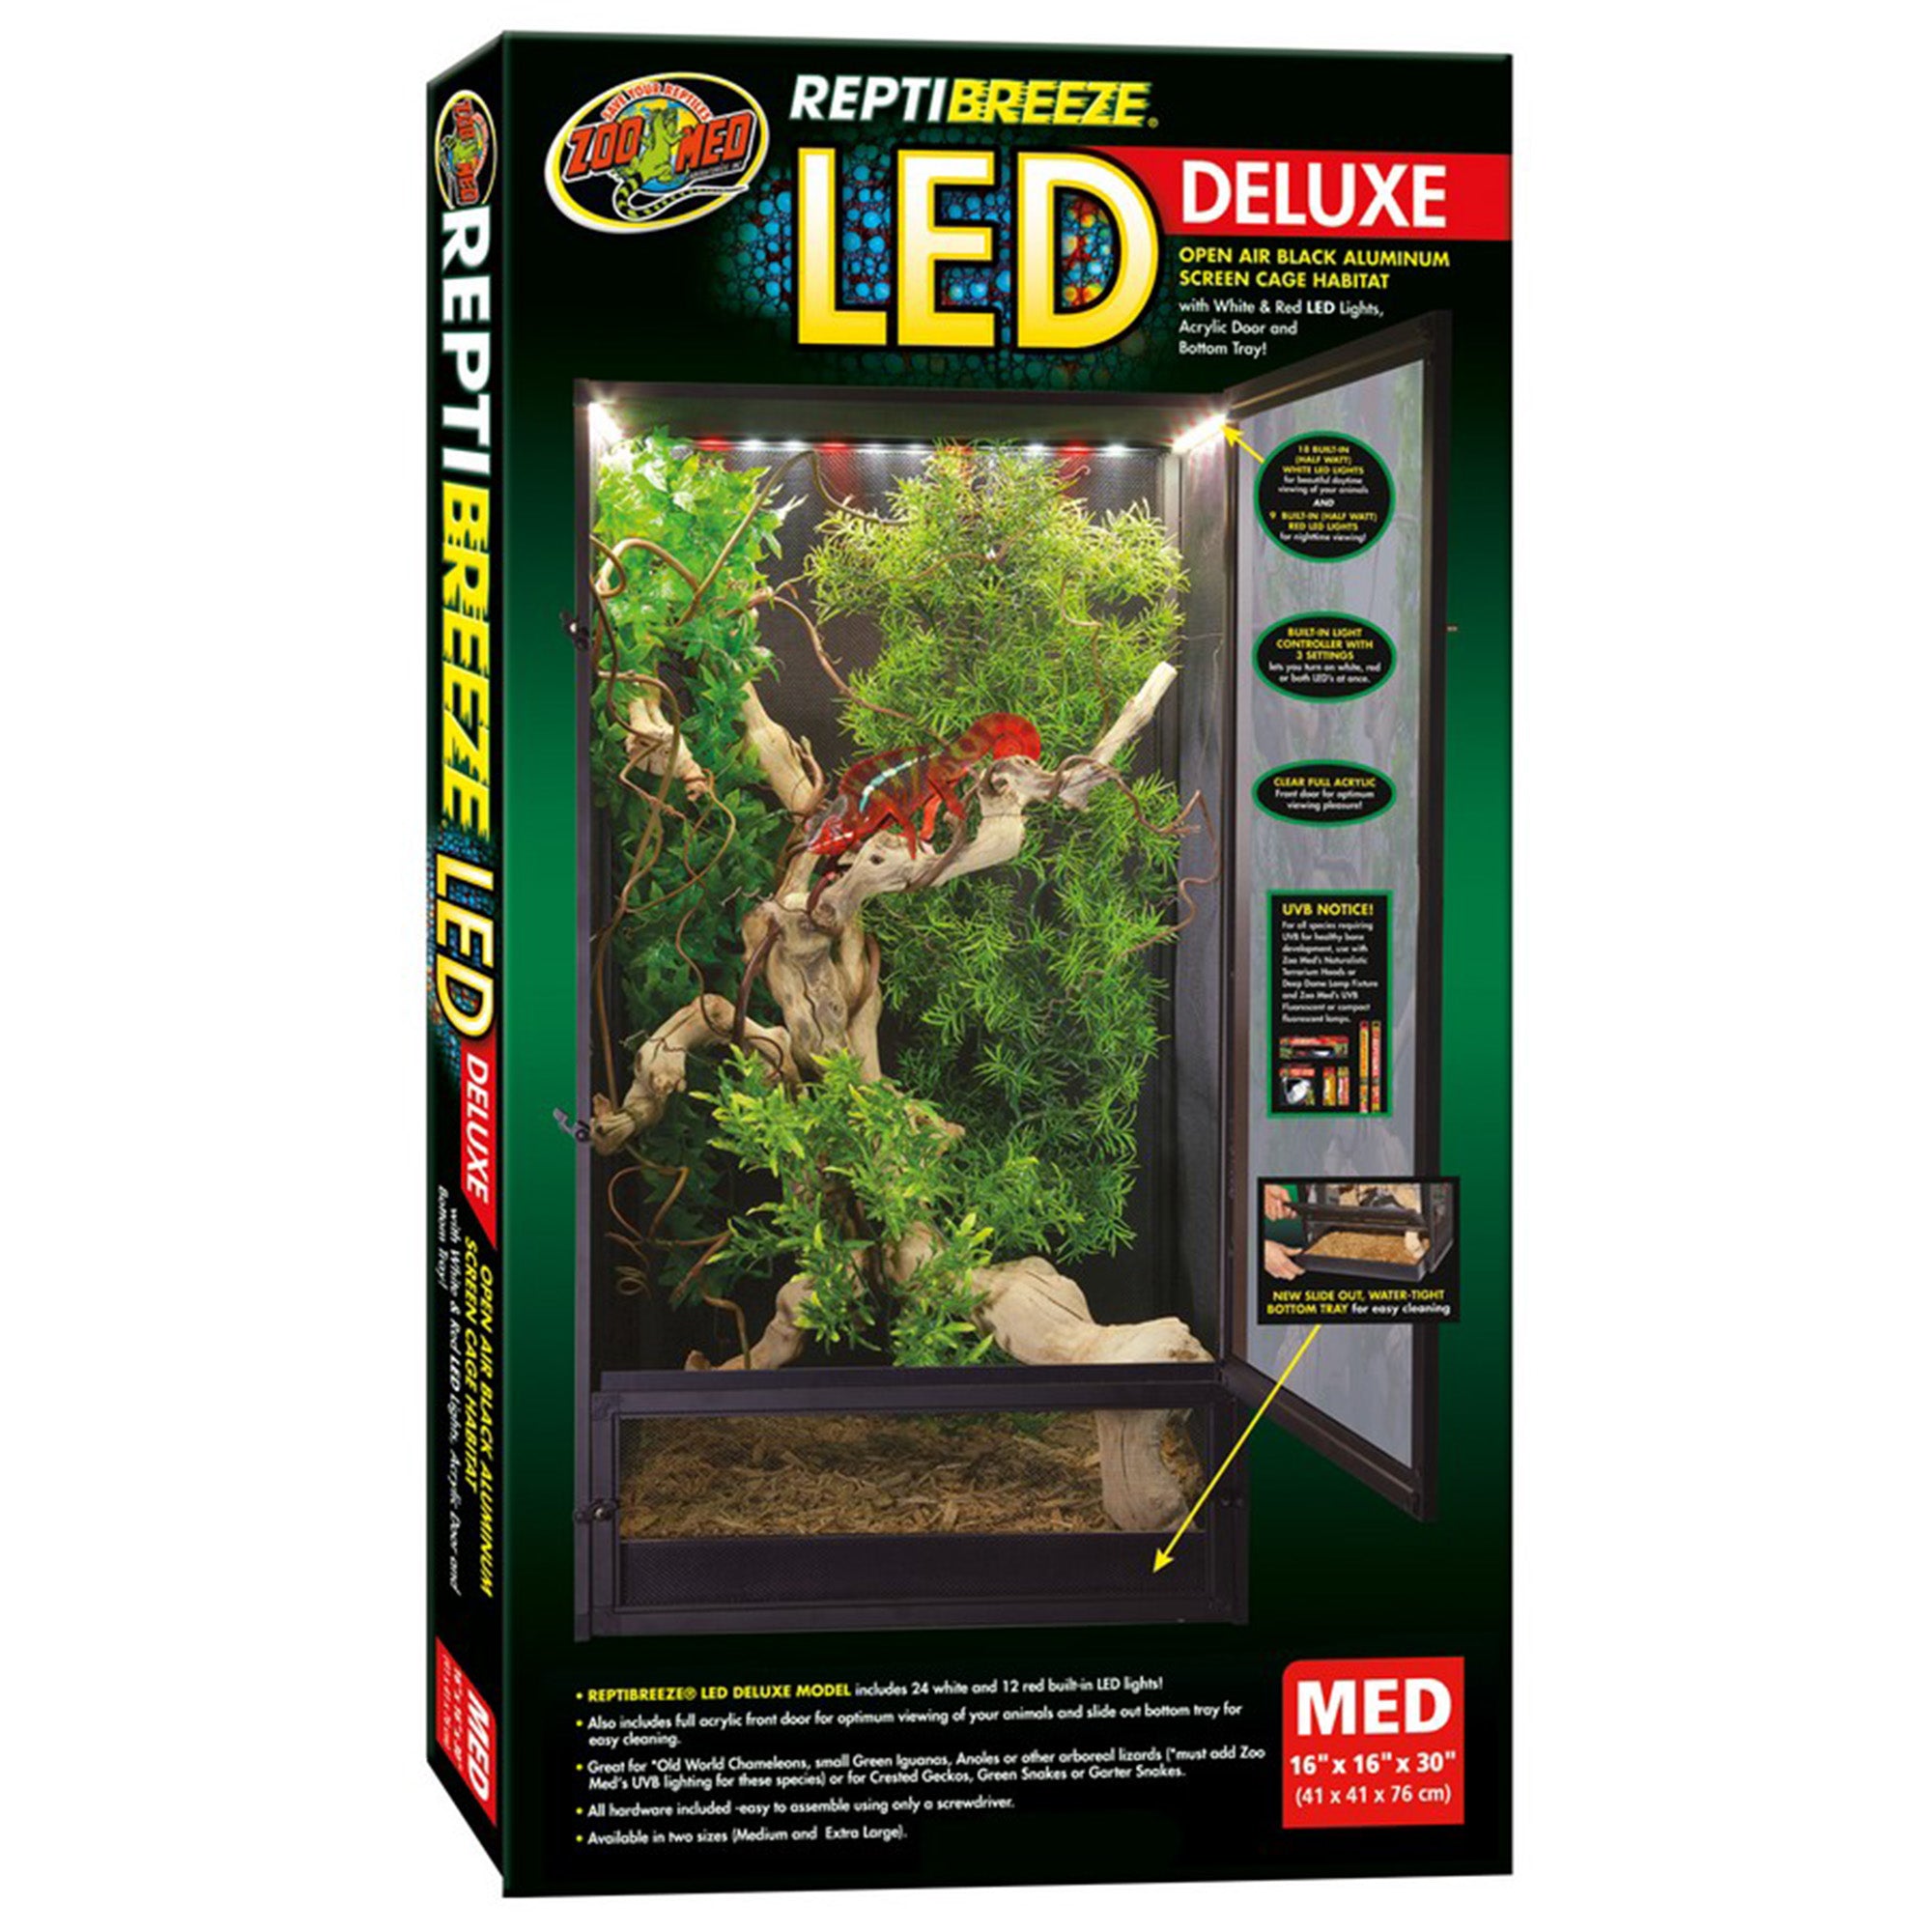 Zoo Med ReptiBreeze LED Deluxe Aluminum Screen Cages